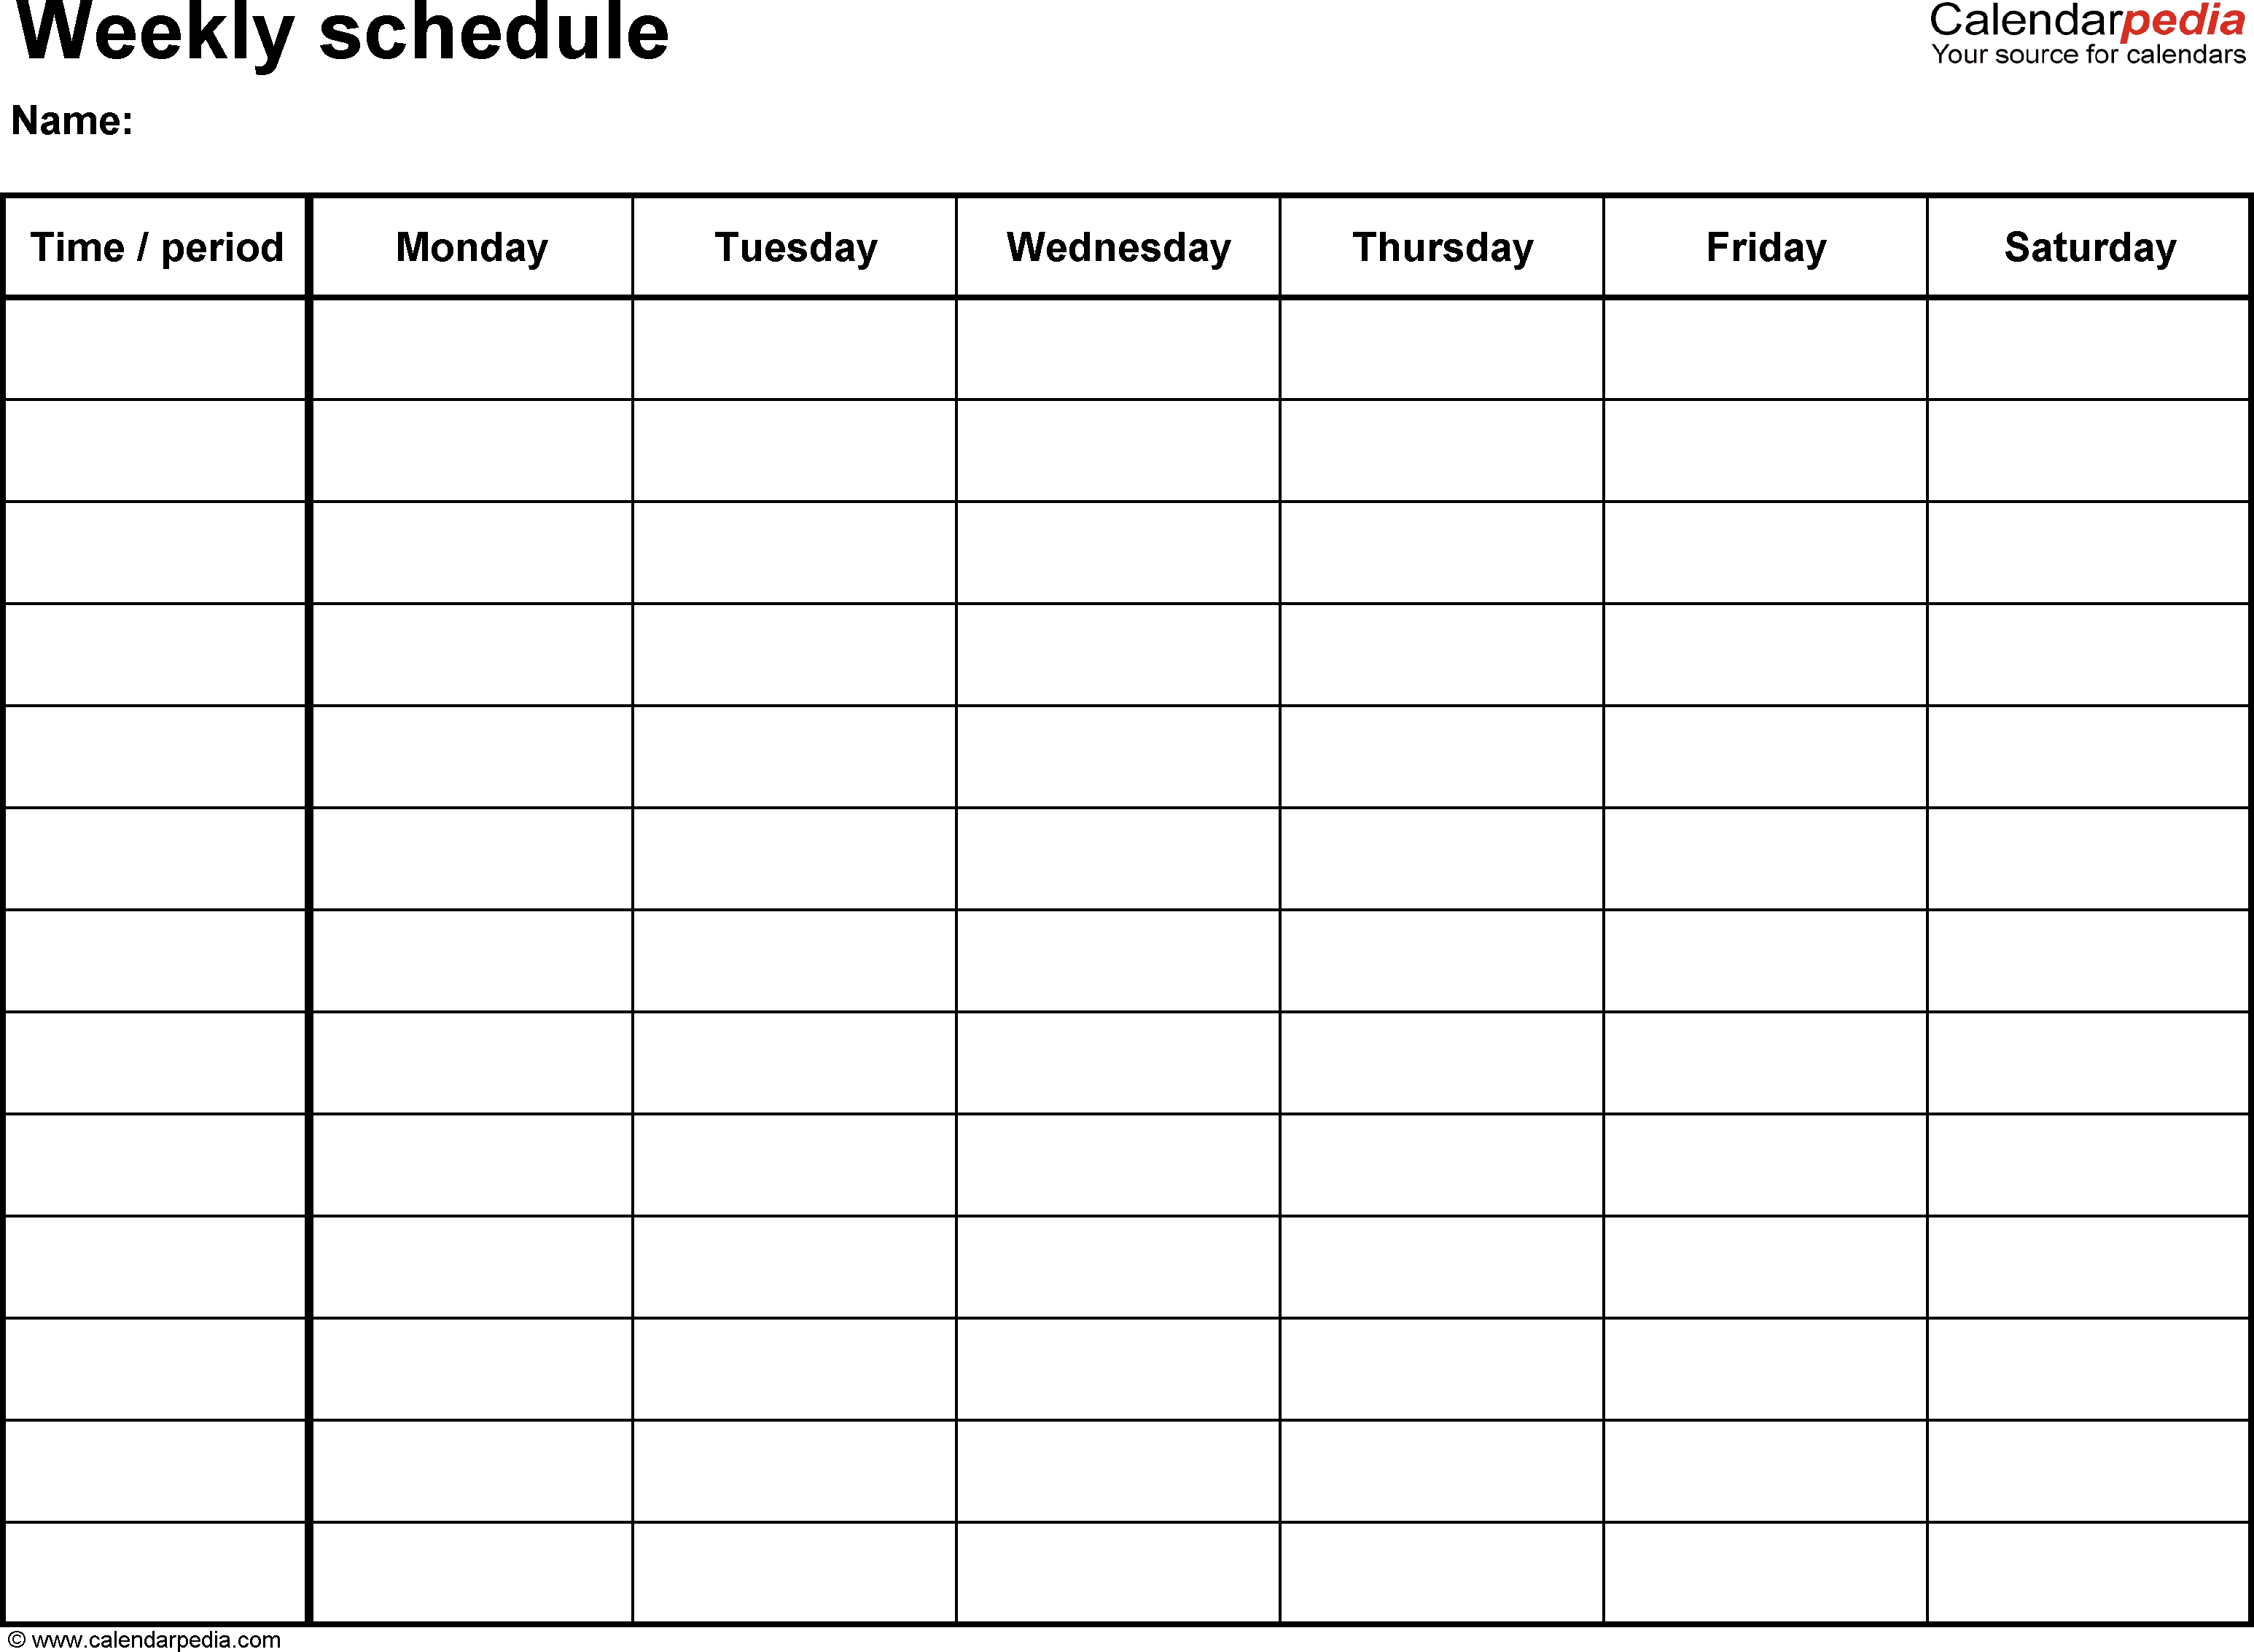 Free Weekly Schedule Templates For Word - 18 Templates for Monday Through Friday Planner Template